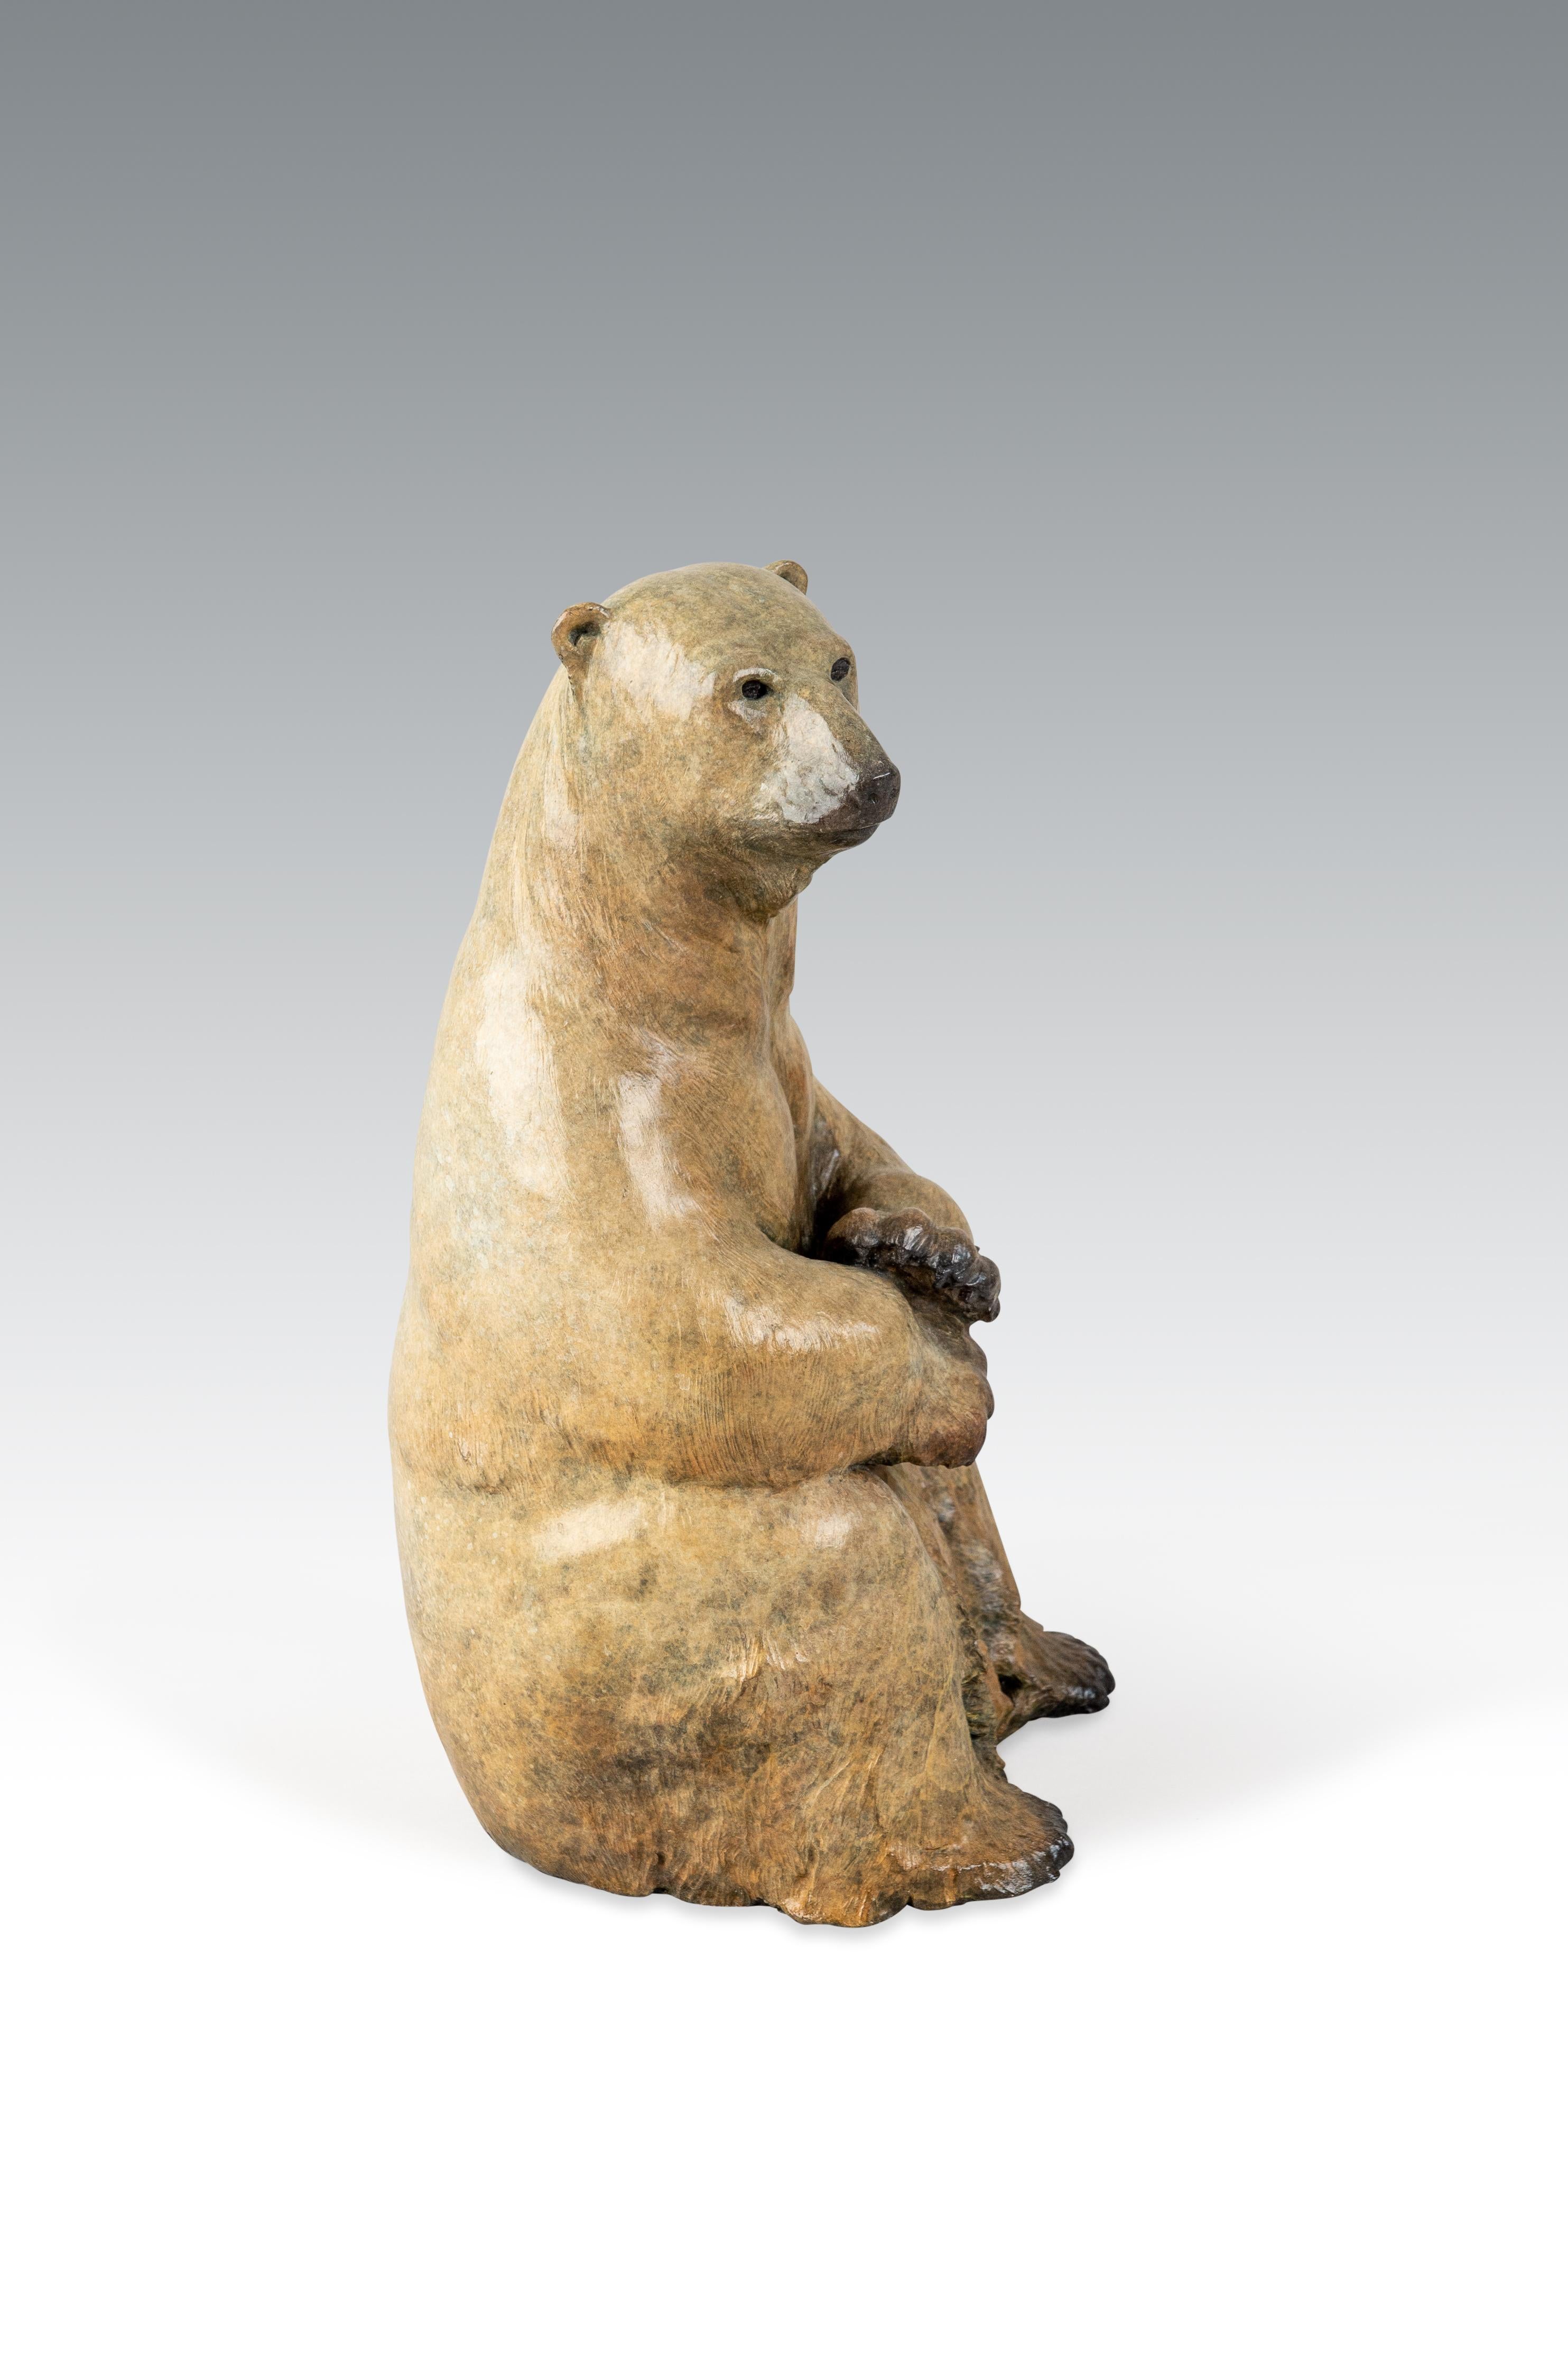 'Maximus' the Polar Bear is an outstanding Bronze Sculpture by Tobias Martin.

Tobias Martin was born in 1972 in Wiltshire, 12 miles from Stonehenge. Influenced by his idyllic rural upbringing, and the forces of nature and magic that permeated his